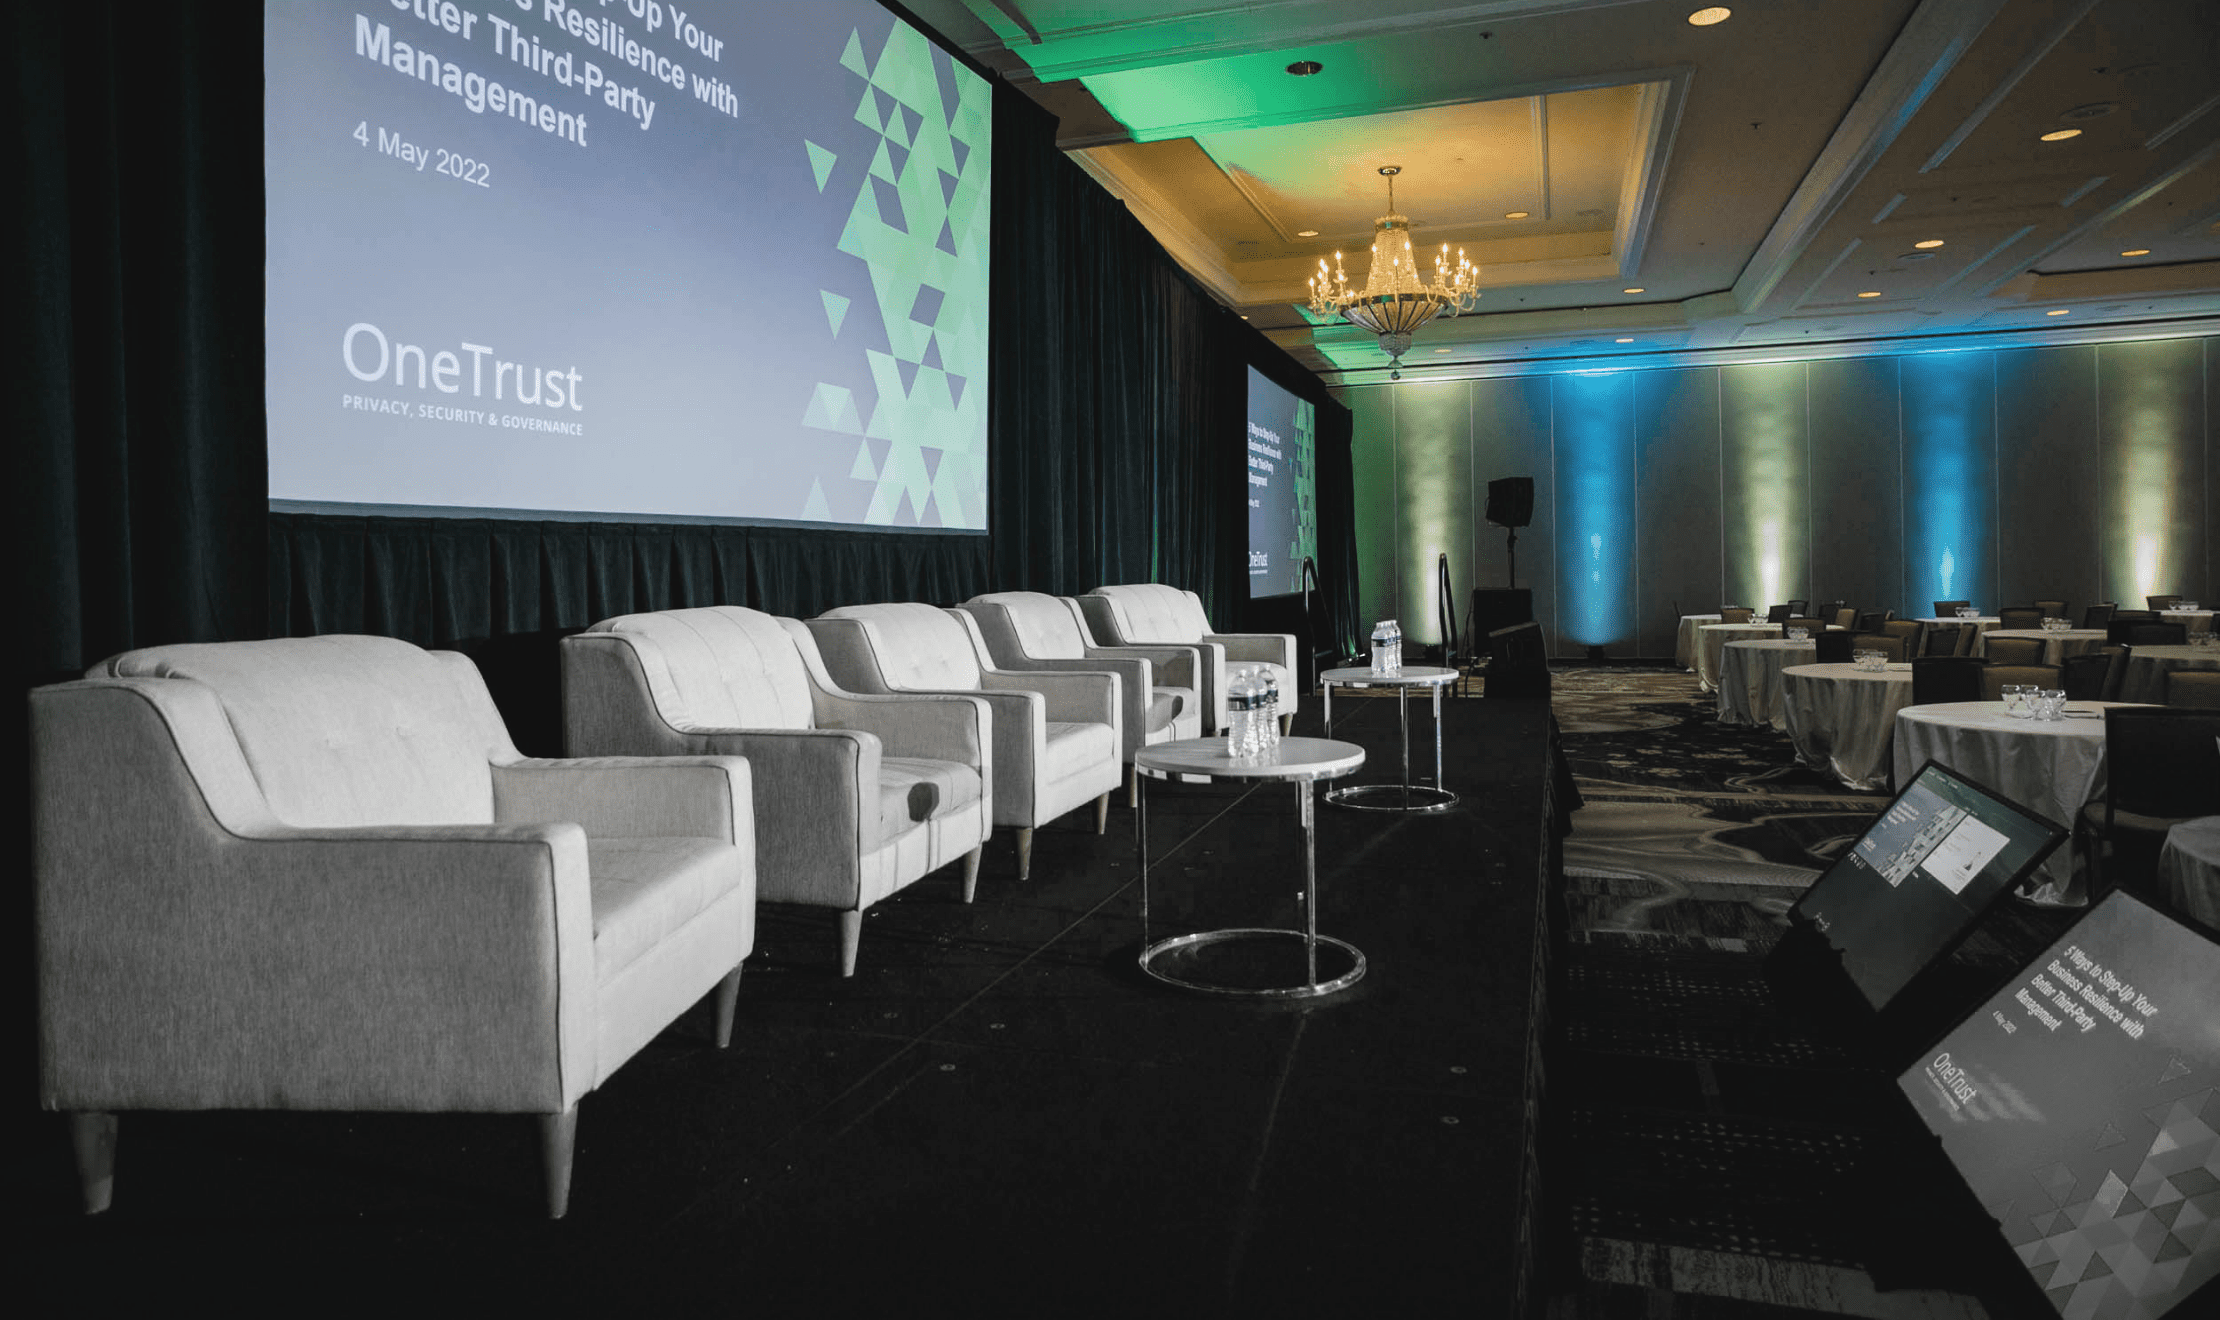 Event stage design with five gray arm chairs looking out towards the open room